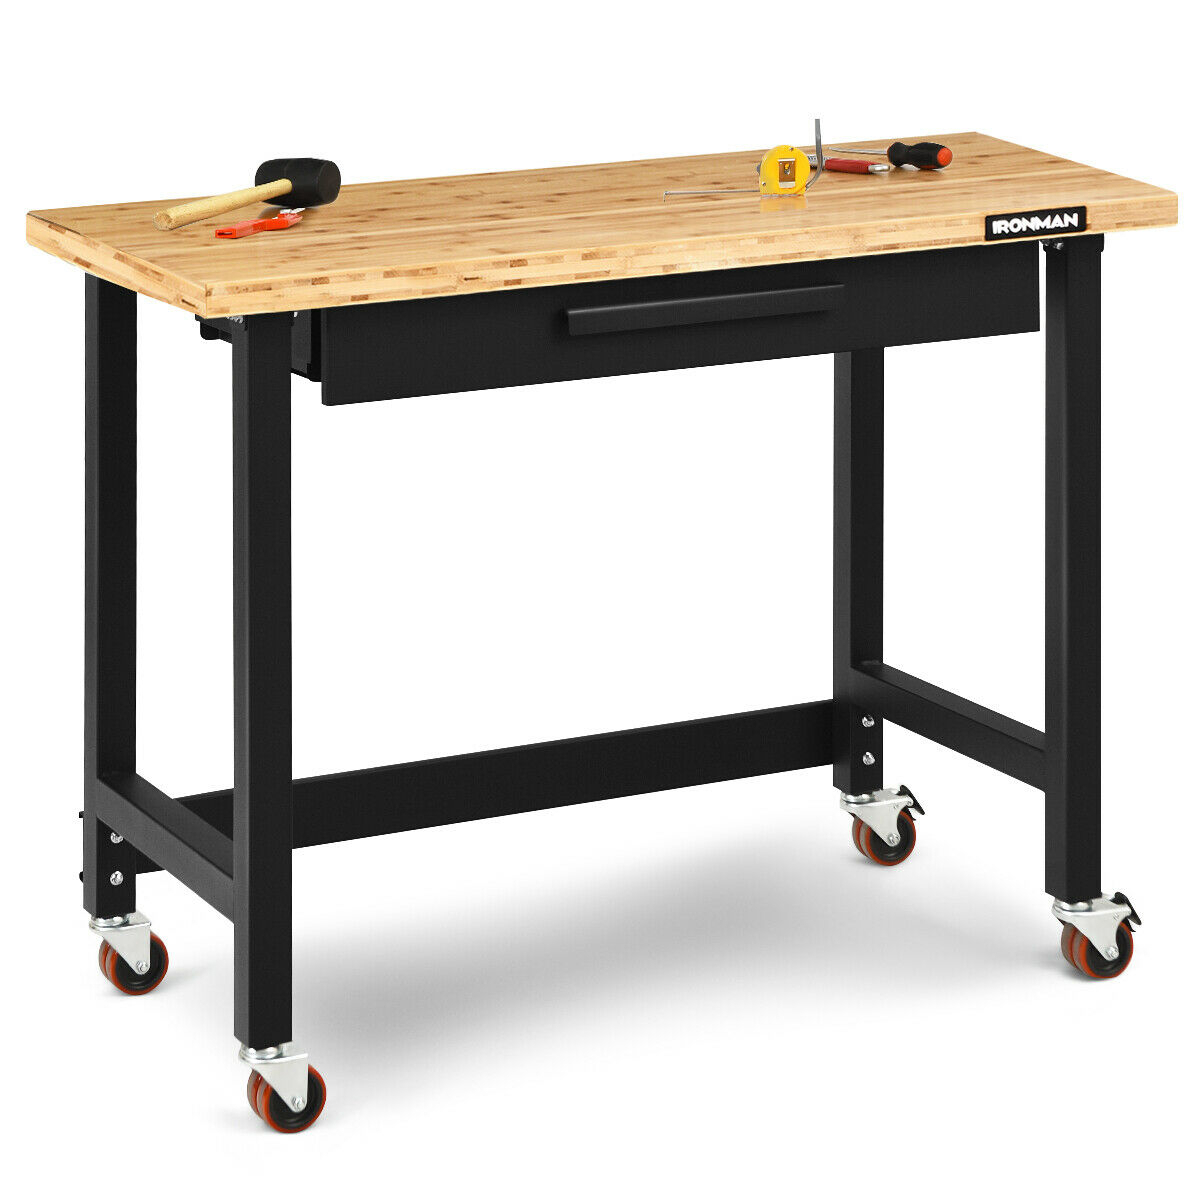 48 Inch Mobile Garage Workbench Bamboo Top With Casters And Organizer Drawer